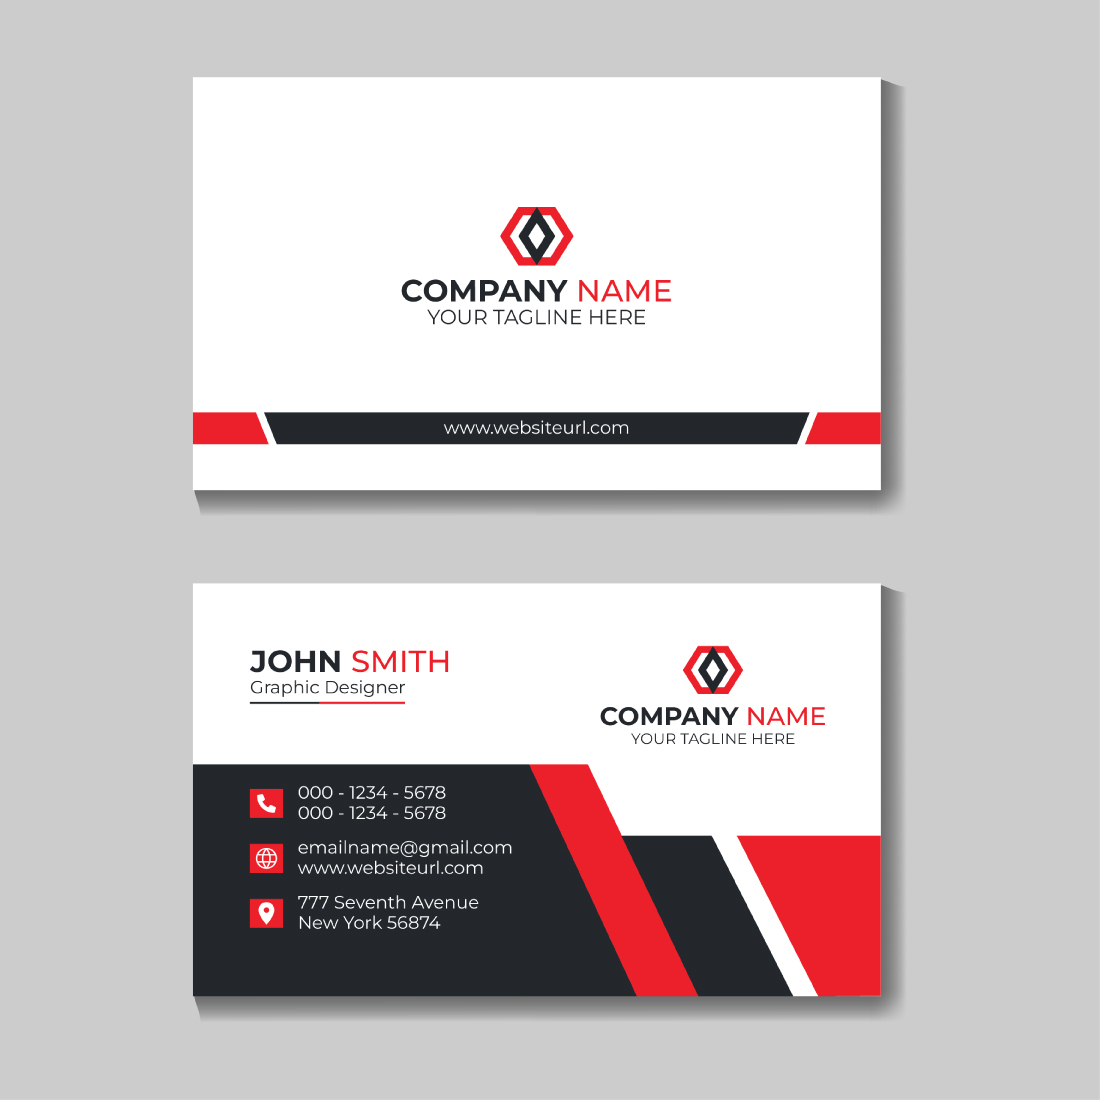 Corporate Professional Creative Clean Business Card Design Template with 4 Colors cover image.